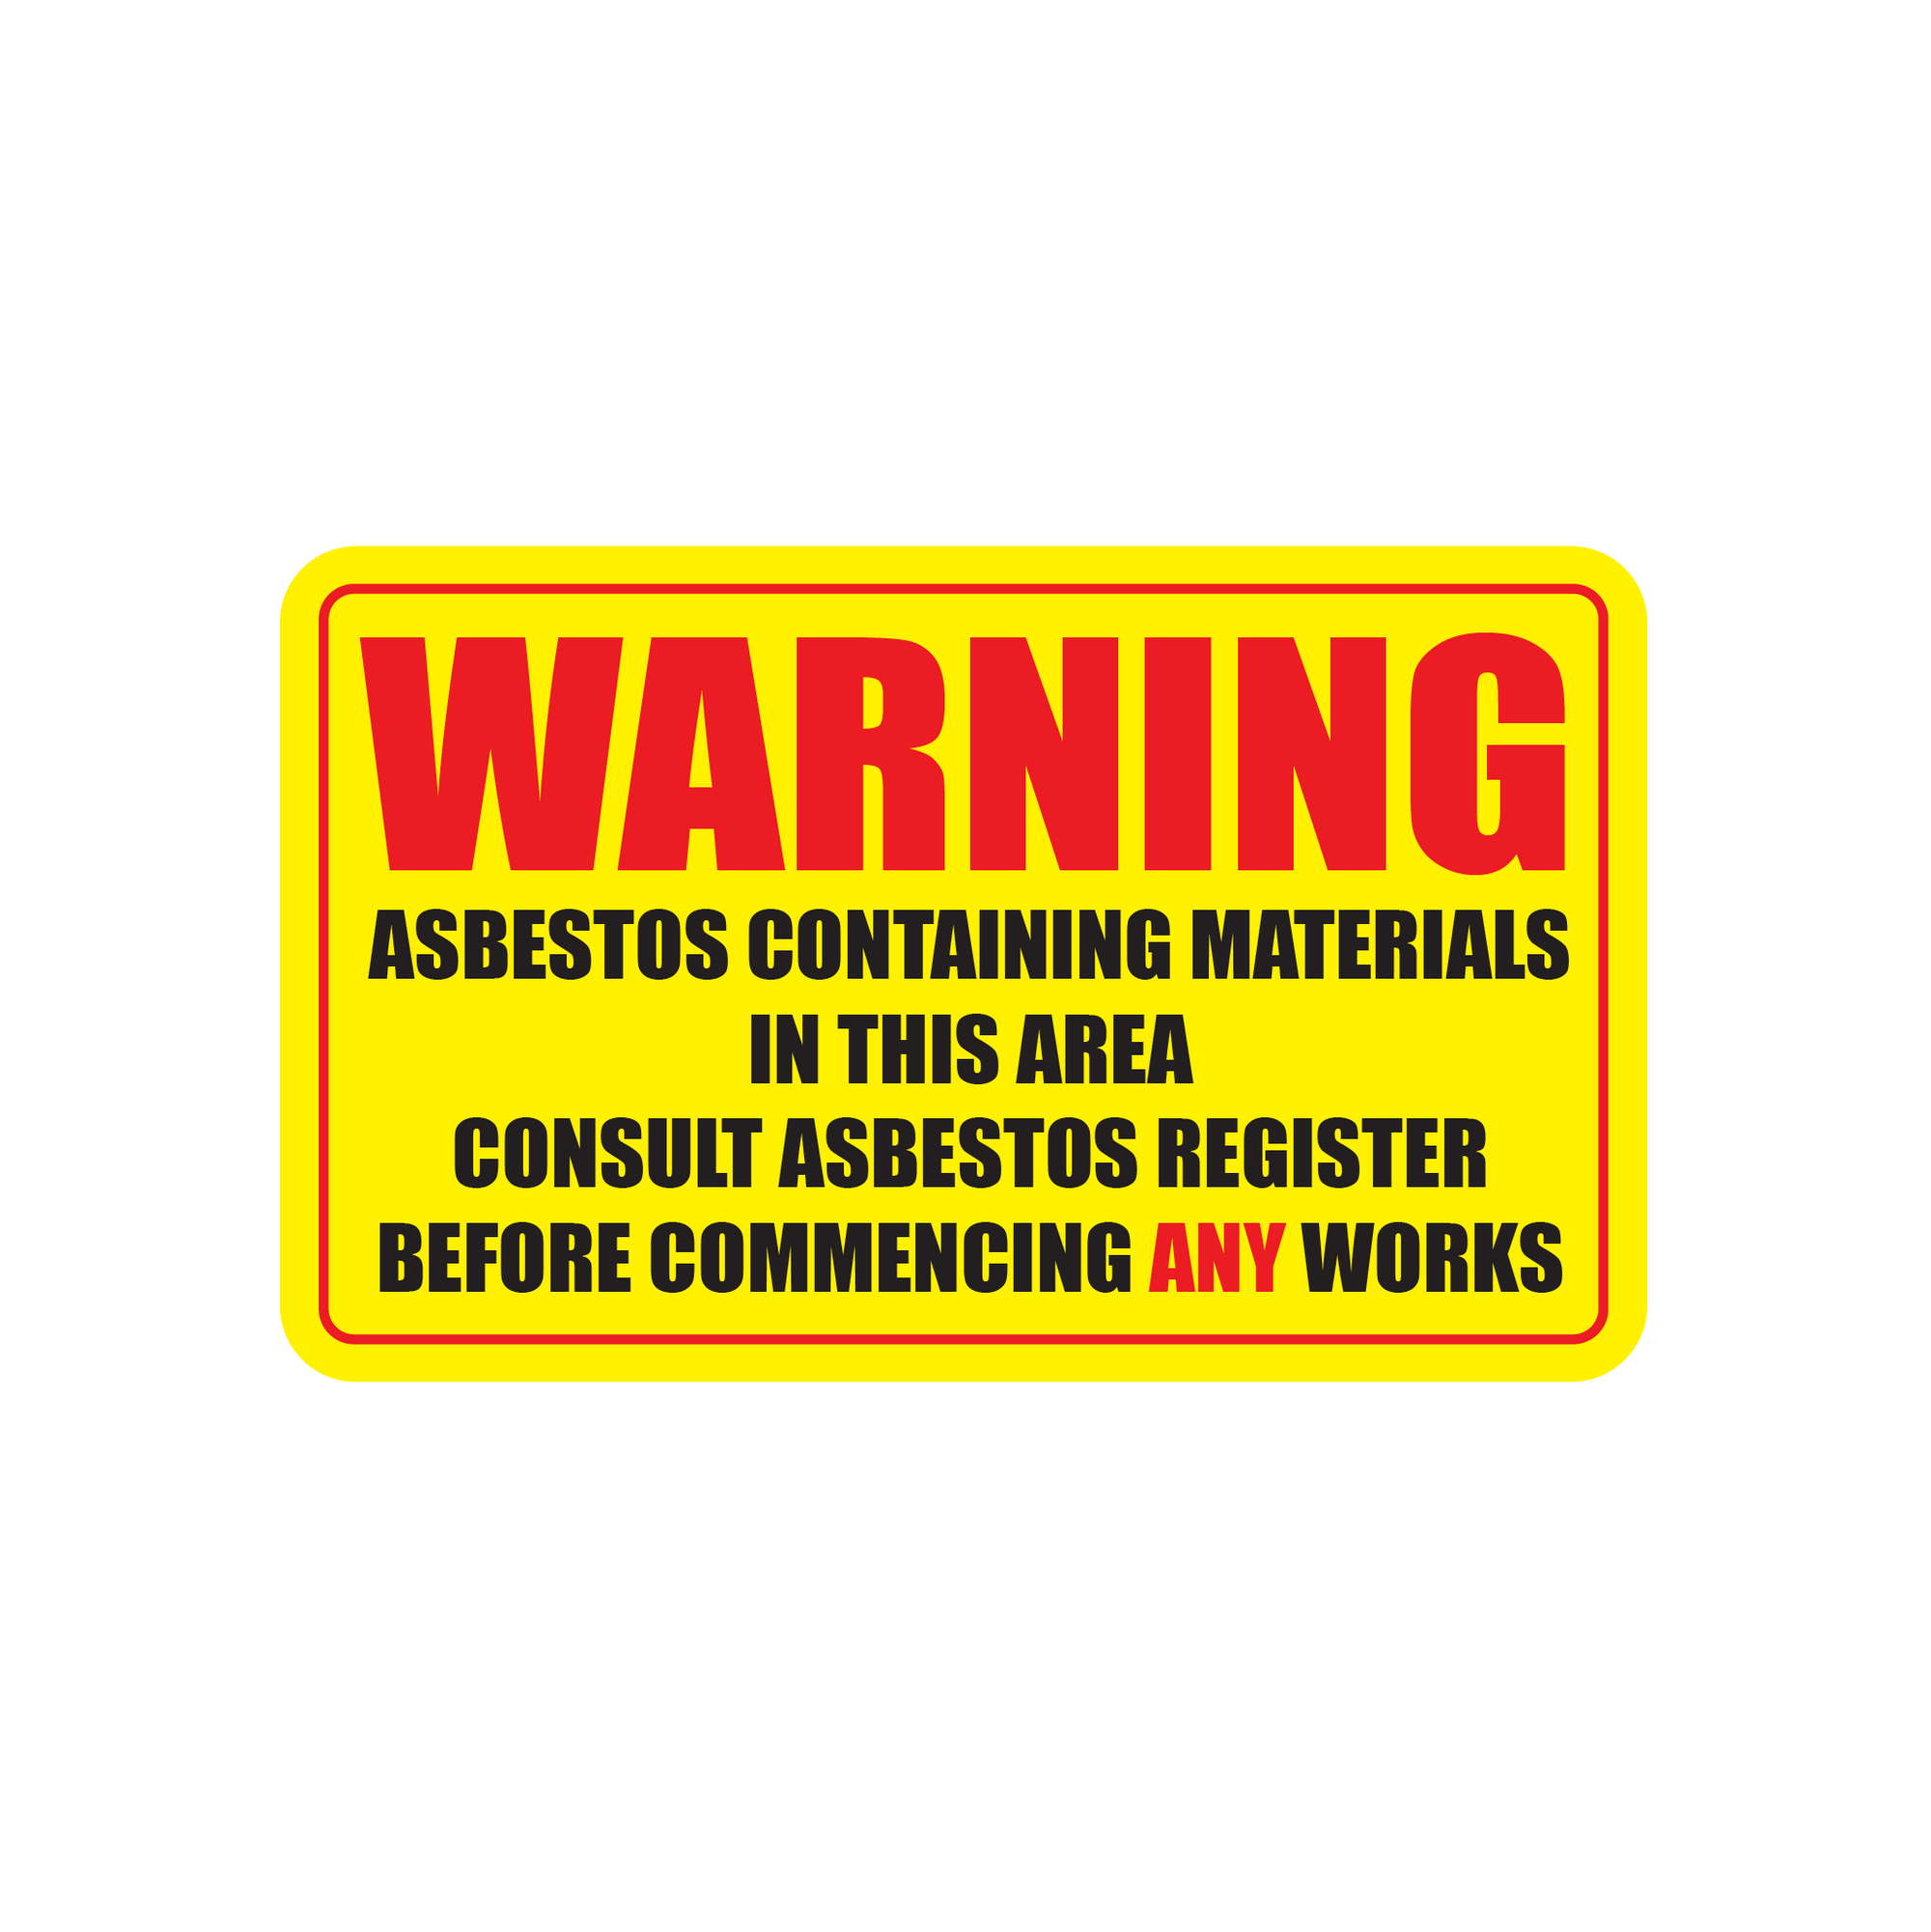 WARNING ASBESTOS CONTAINING MATERIALS IN THIS AREA - S25